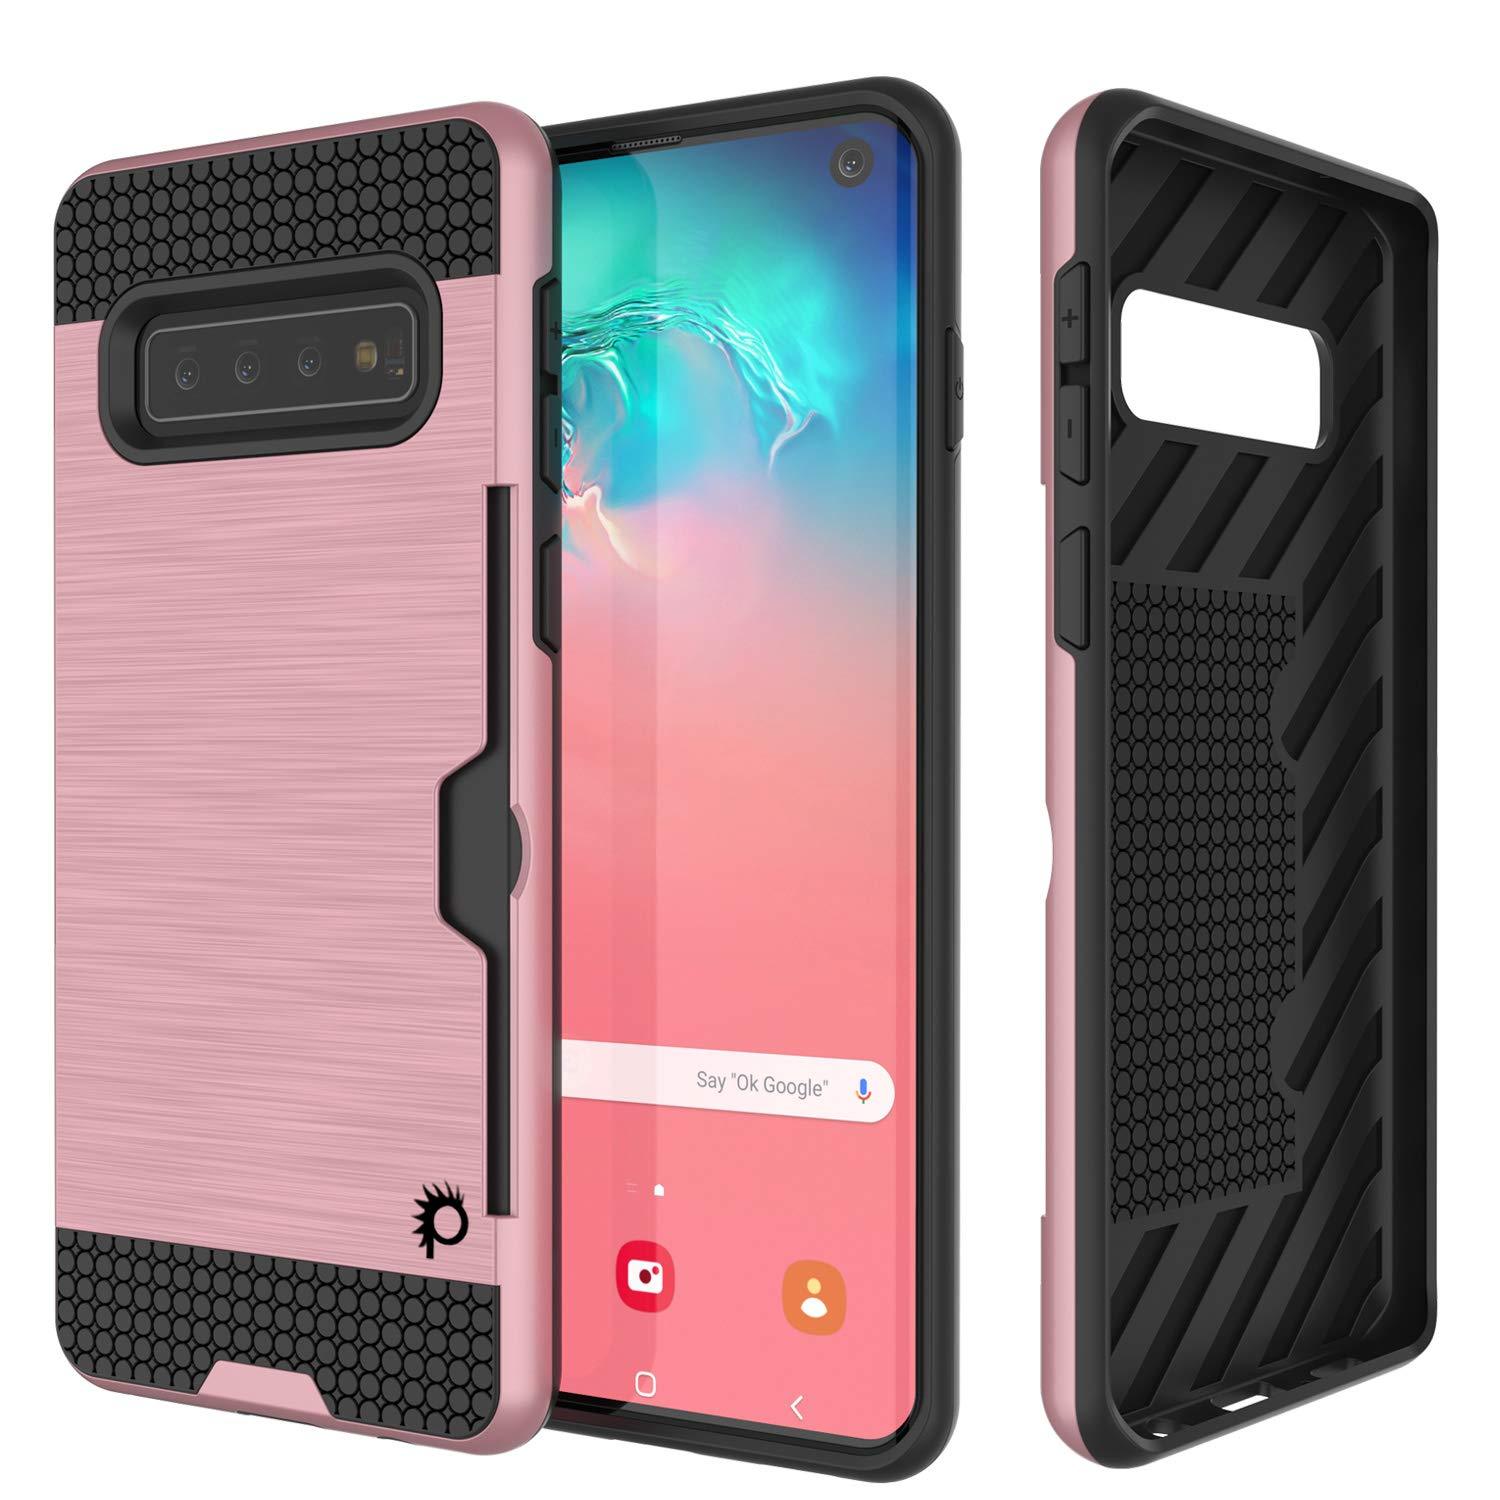 Galaxy S10e Case, PUNKcase [SLOT Series] [Slim Fit] Dual-Layer Armor Cover w/Integrated Anti-Shock System, Credit Card Slot [Rose Gold]